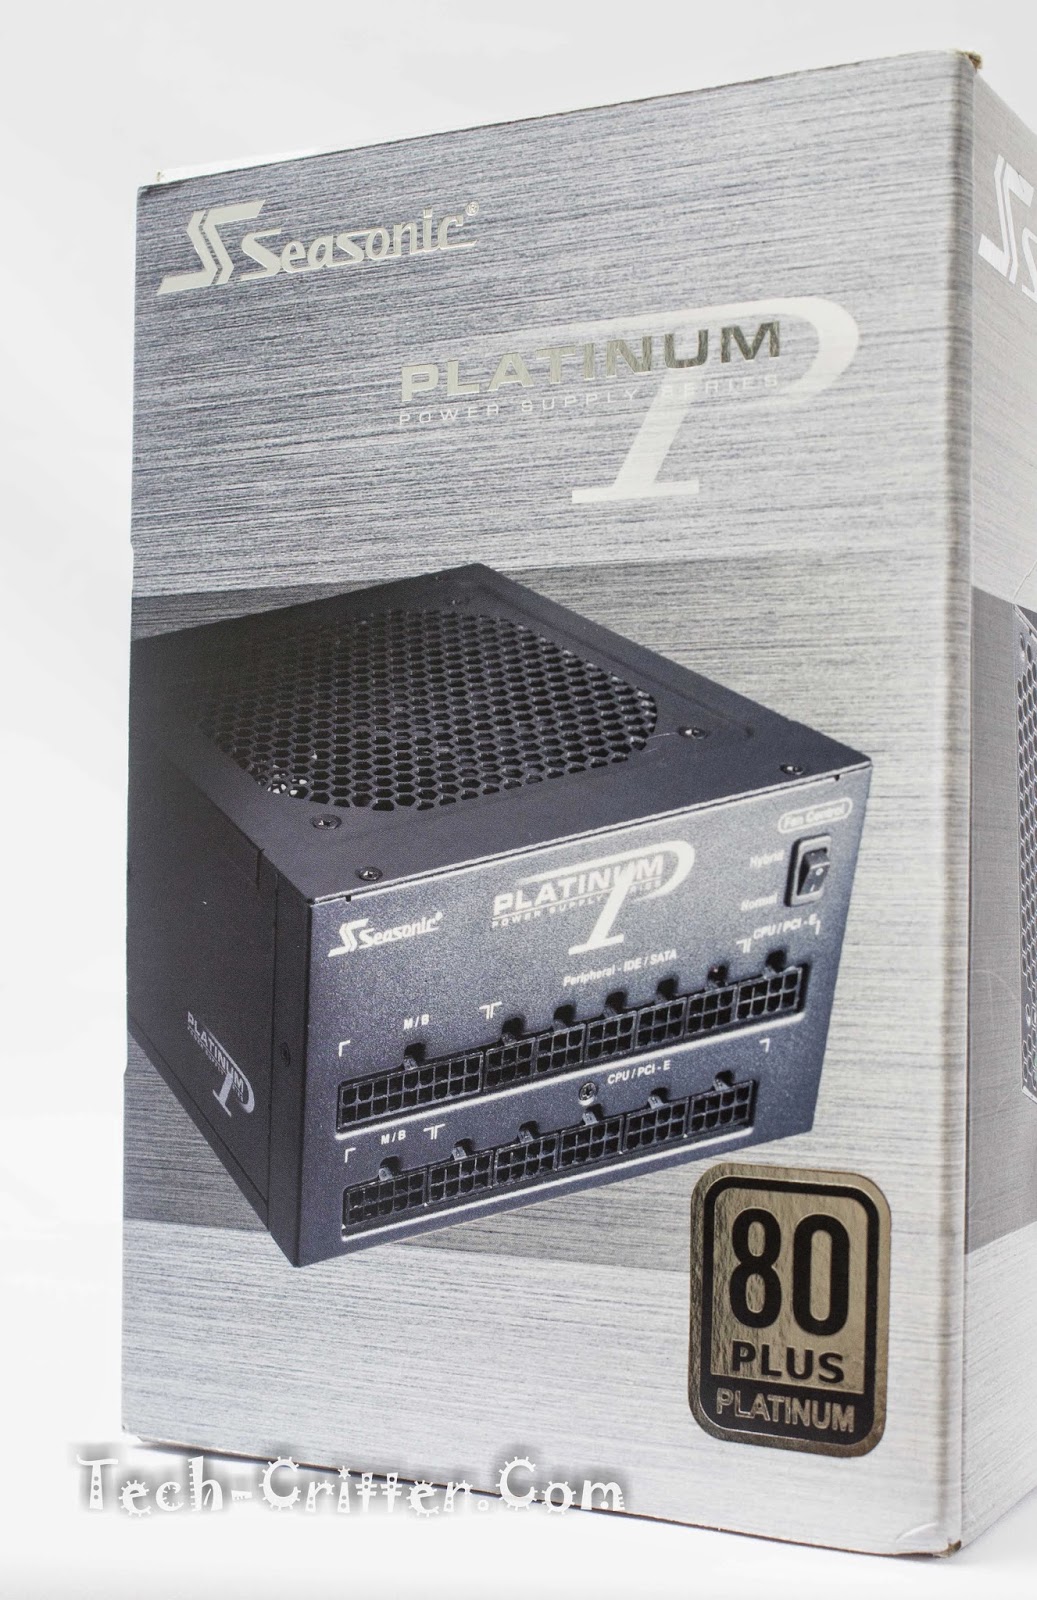 Unboxing & Overview: Seasonic Platinum Series 860W Power Supply Unit 50